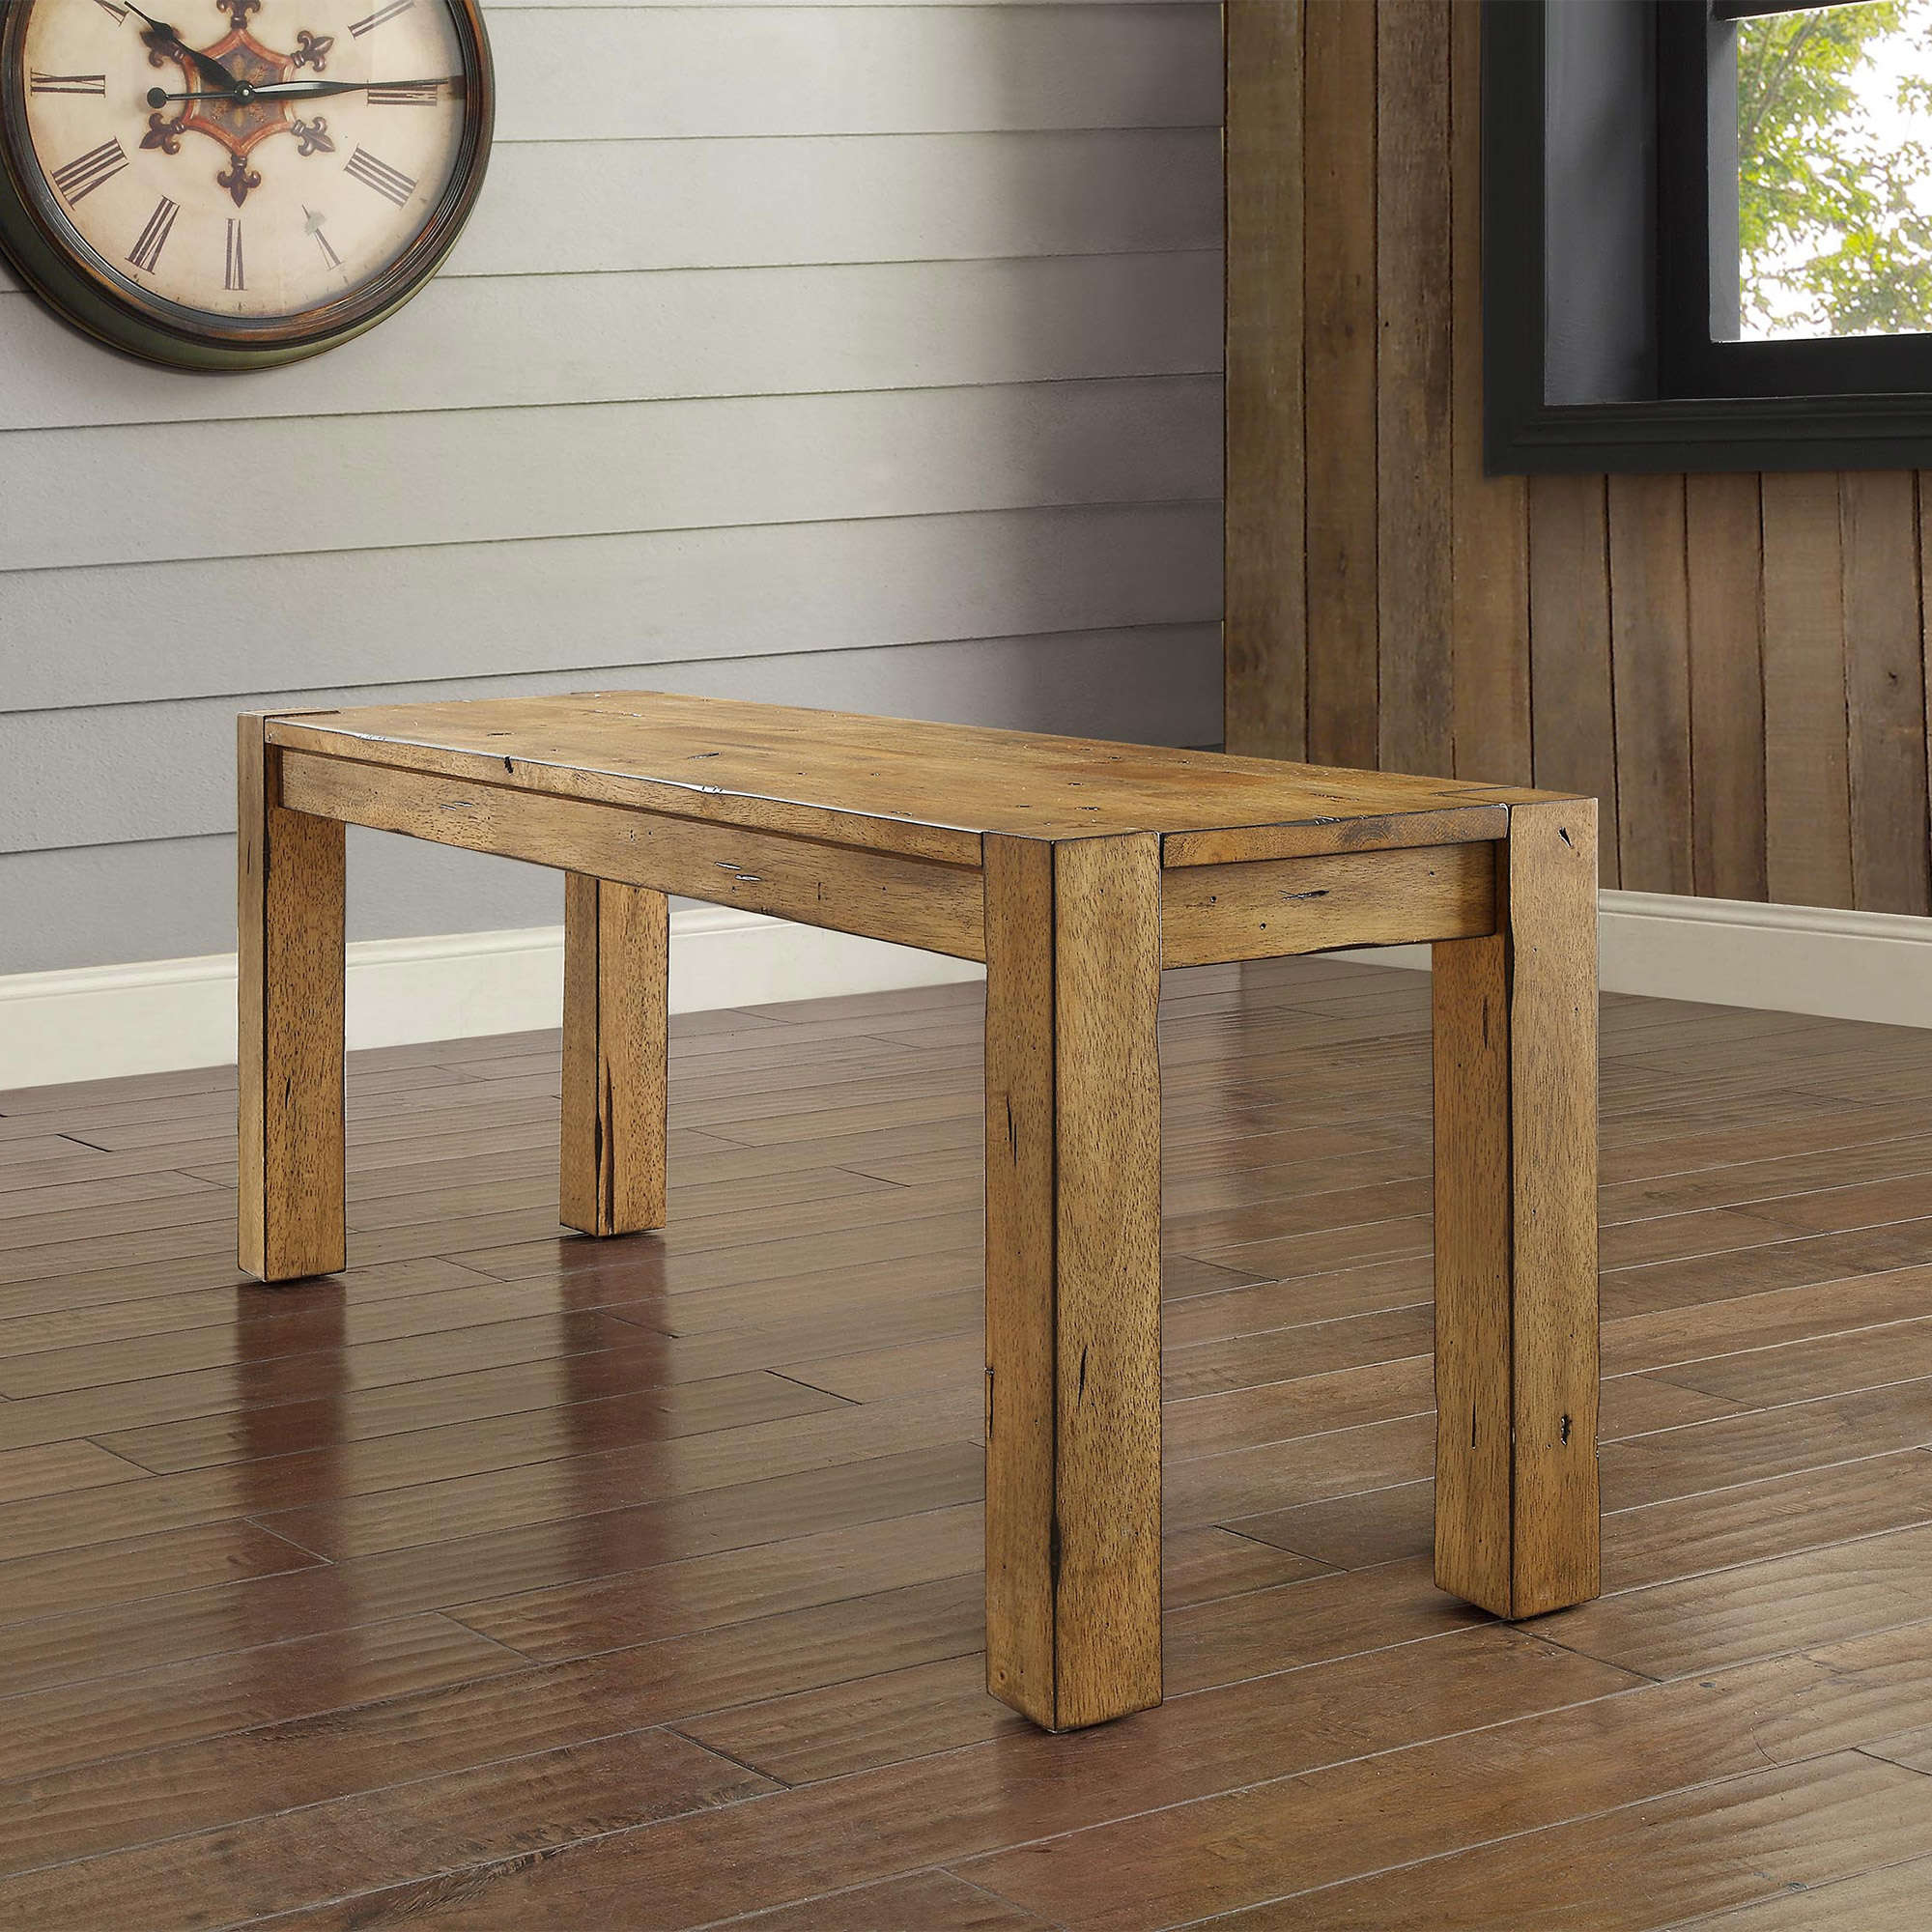 Better Homes & Gardens Bryant Solid Wood Dining Bench, Rustic Brown - image 1 of 8